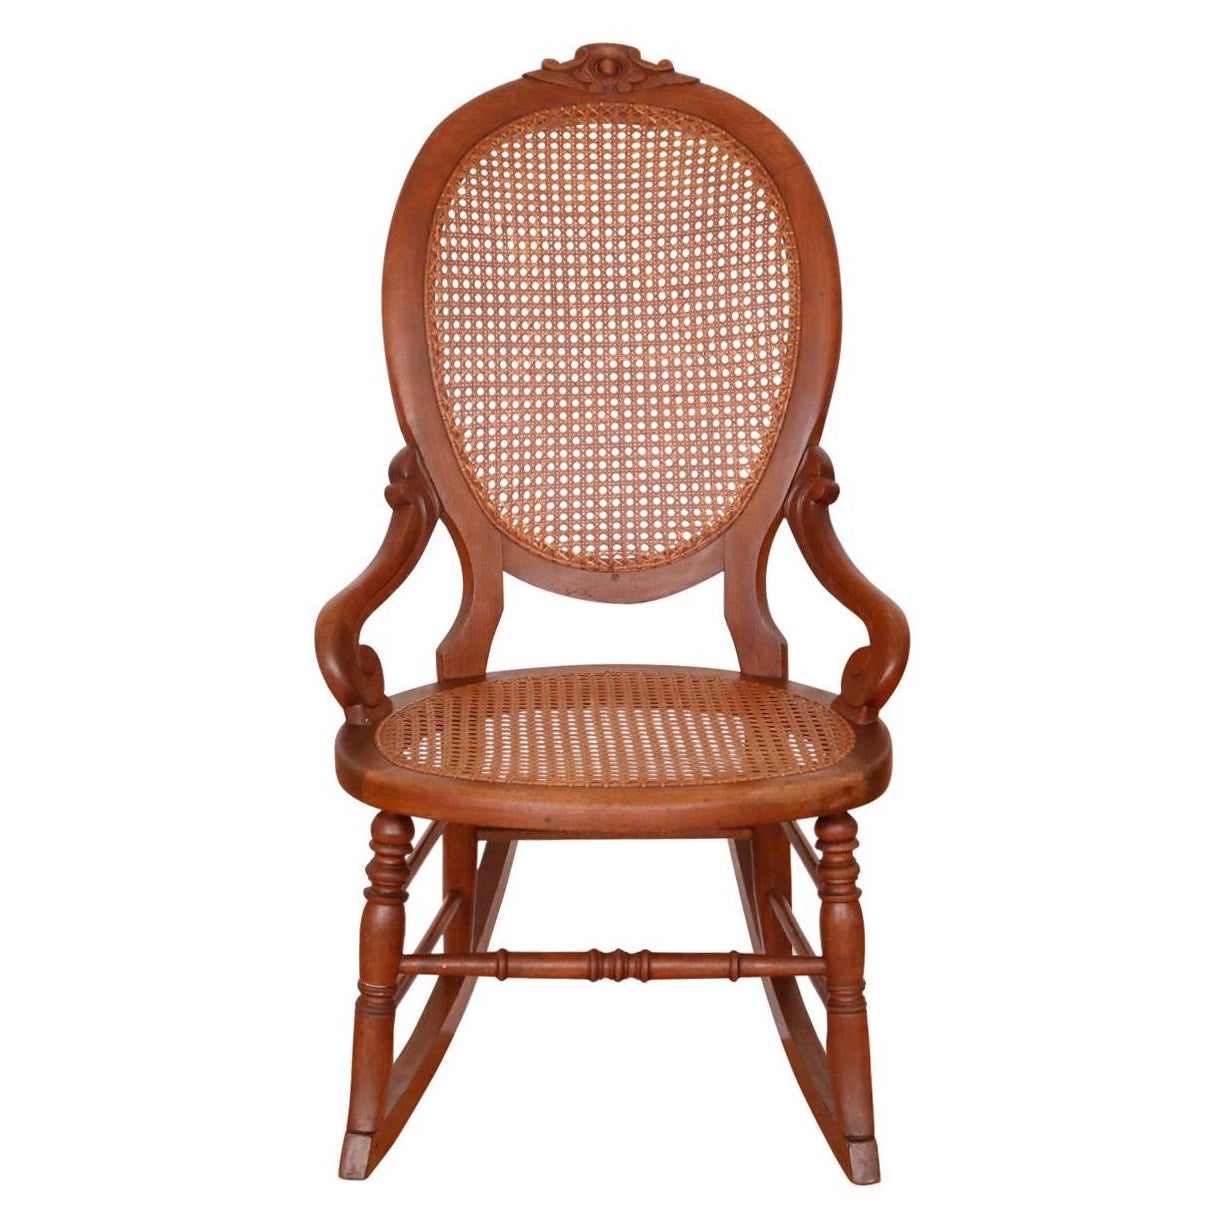 Details about   Antique Rocking Chair Cane Seat Structurally Sound & Sturdy 